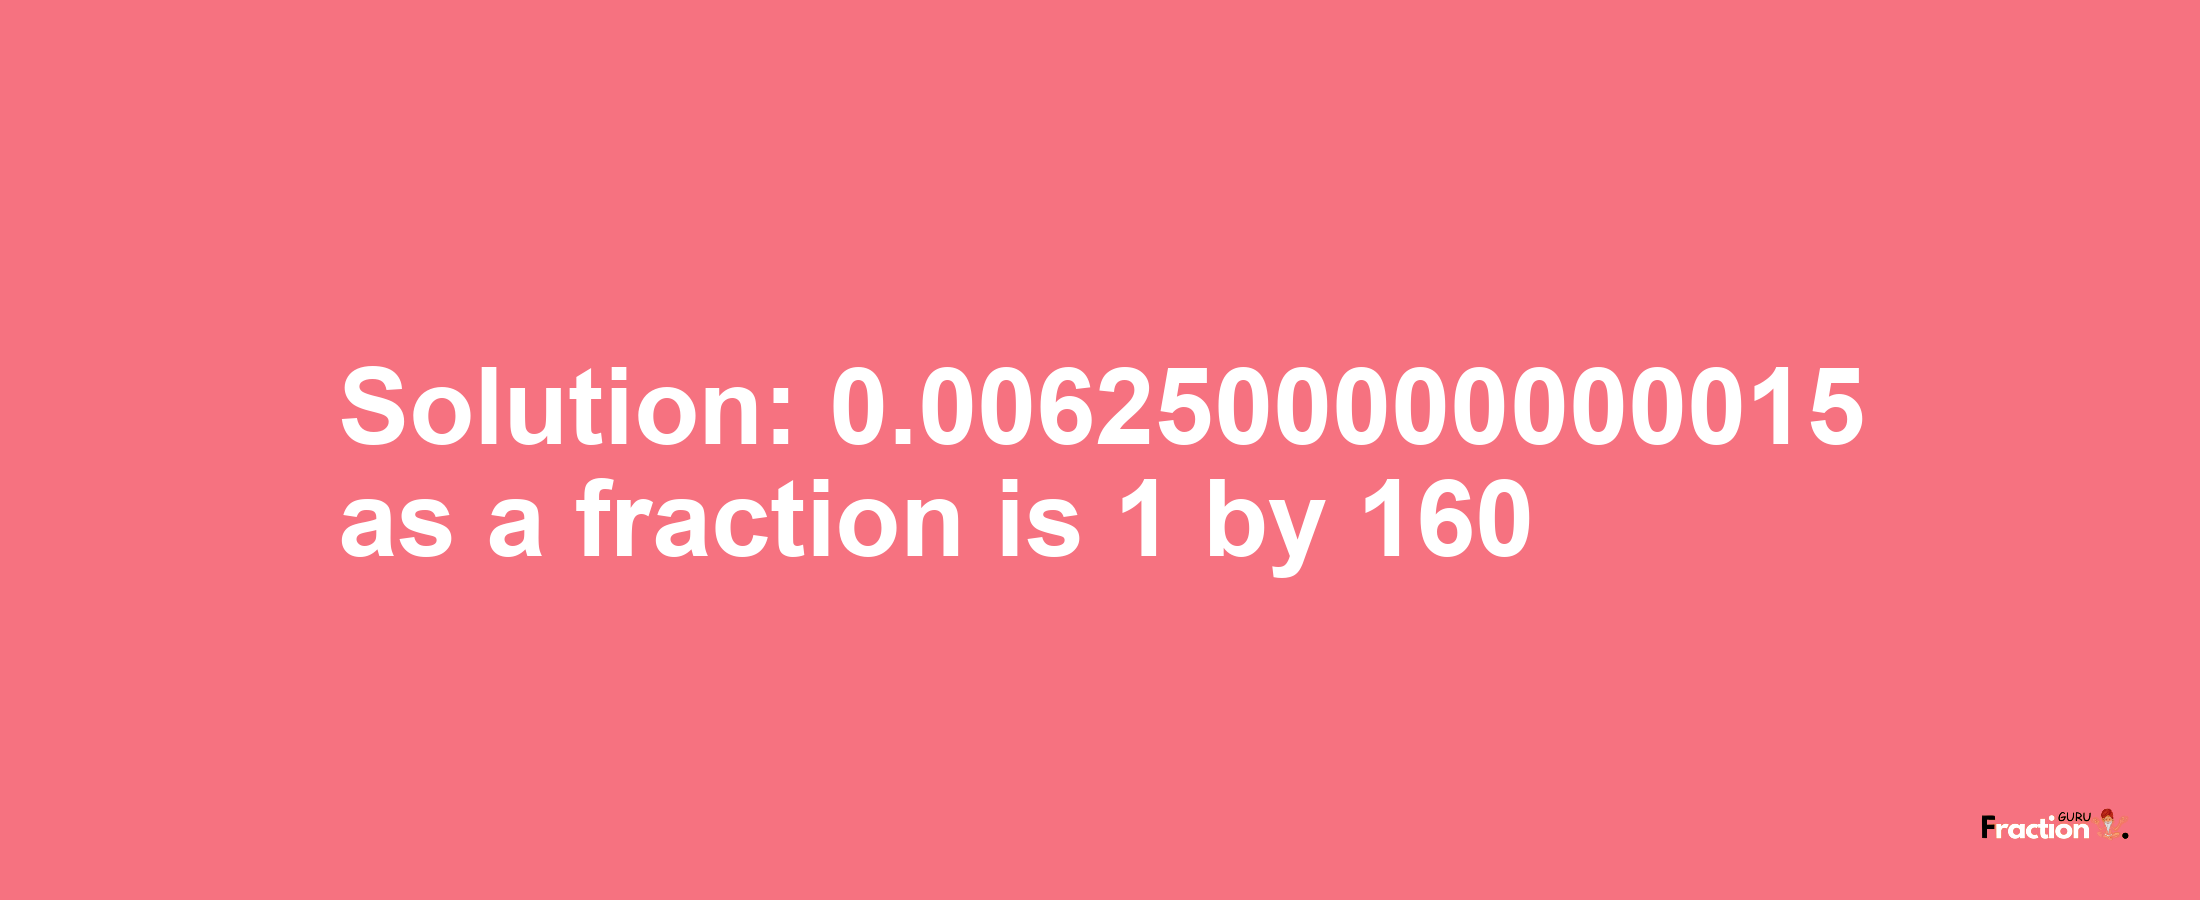 Solution:0.0062500000000015 as a fraction is 1/160